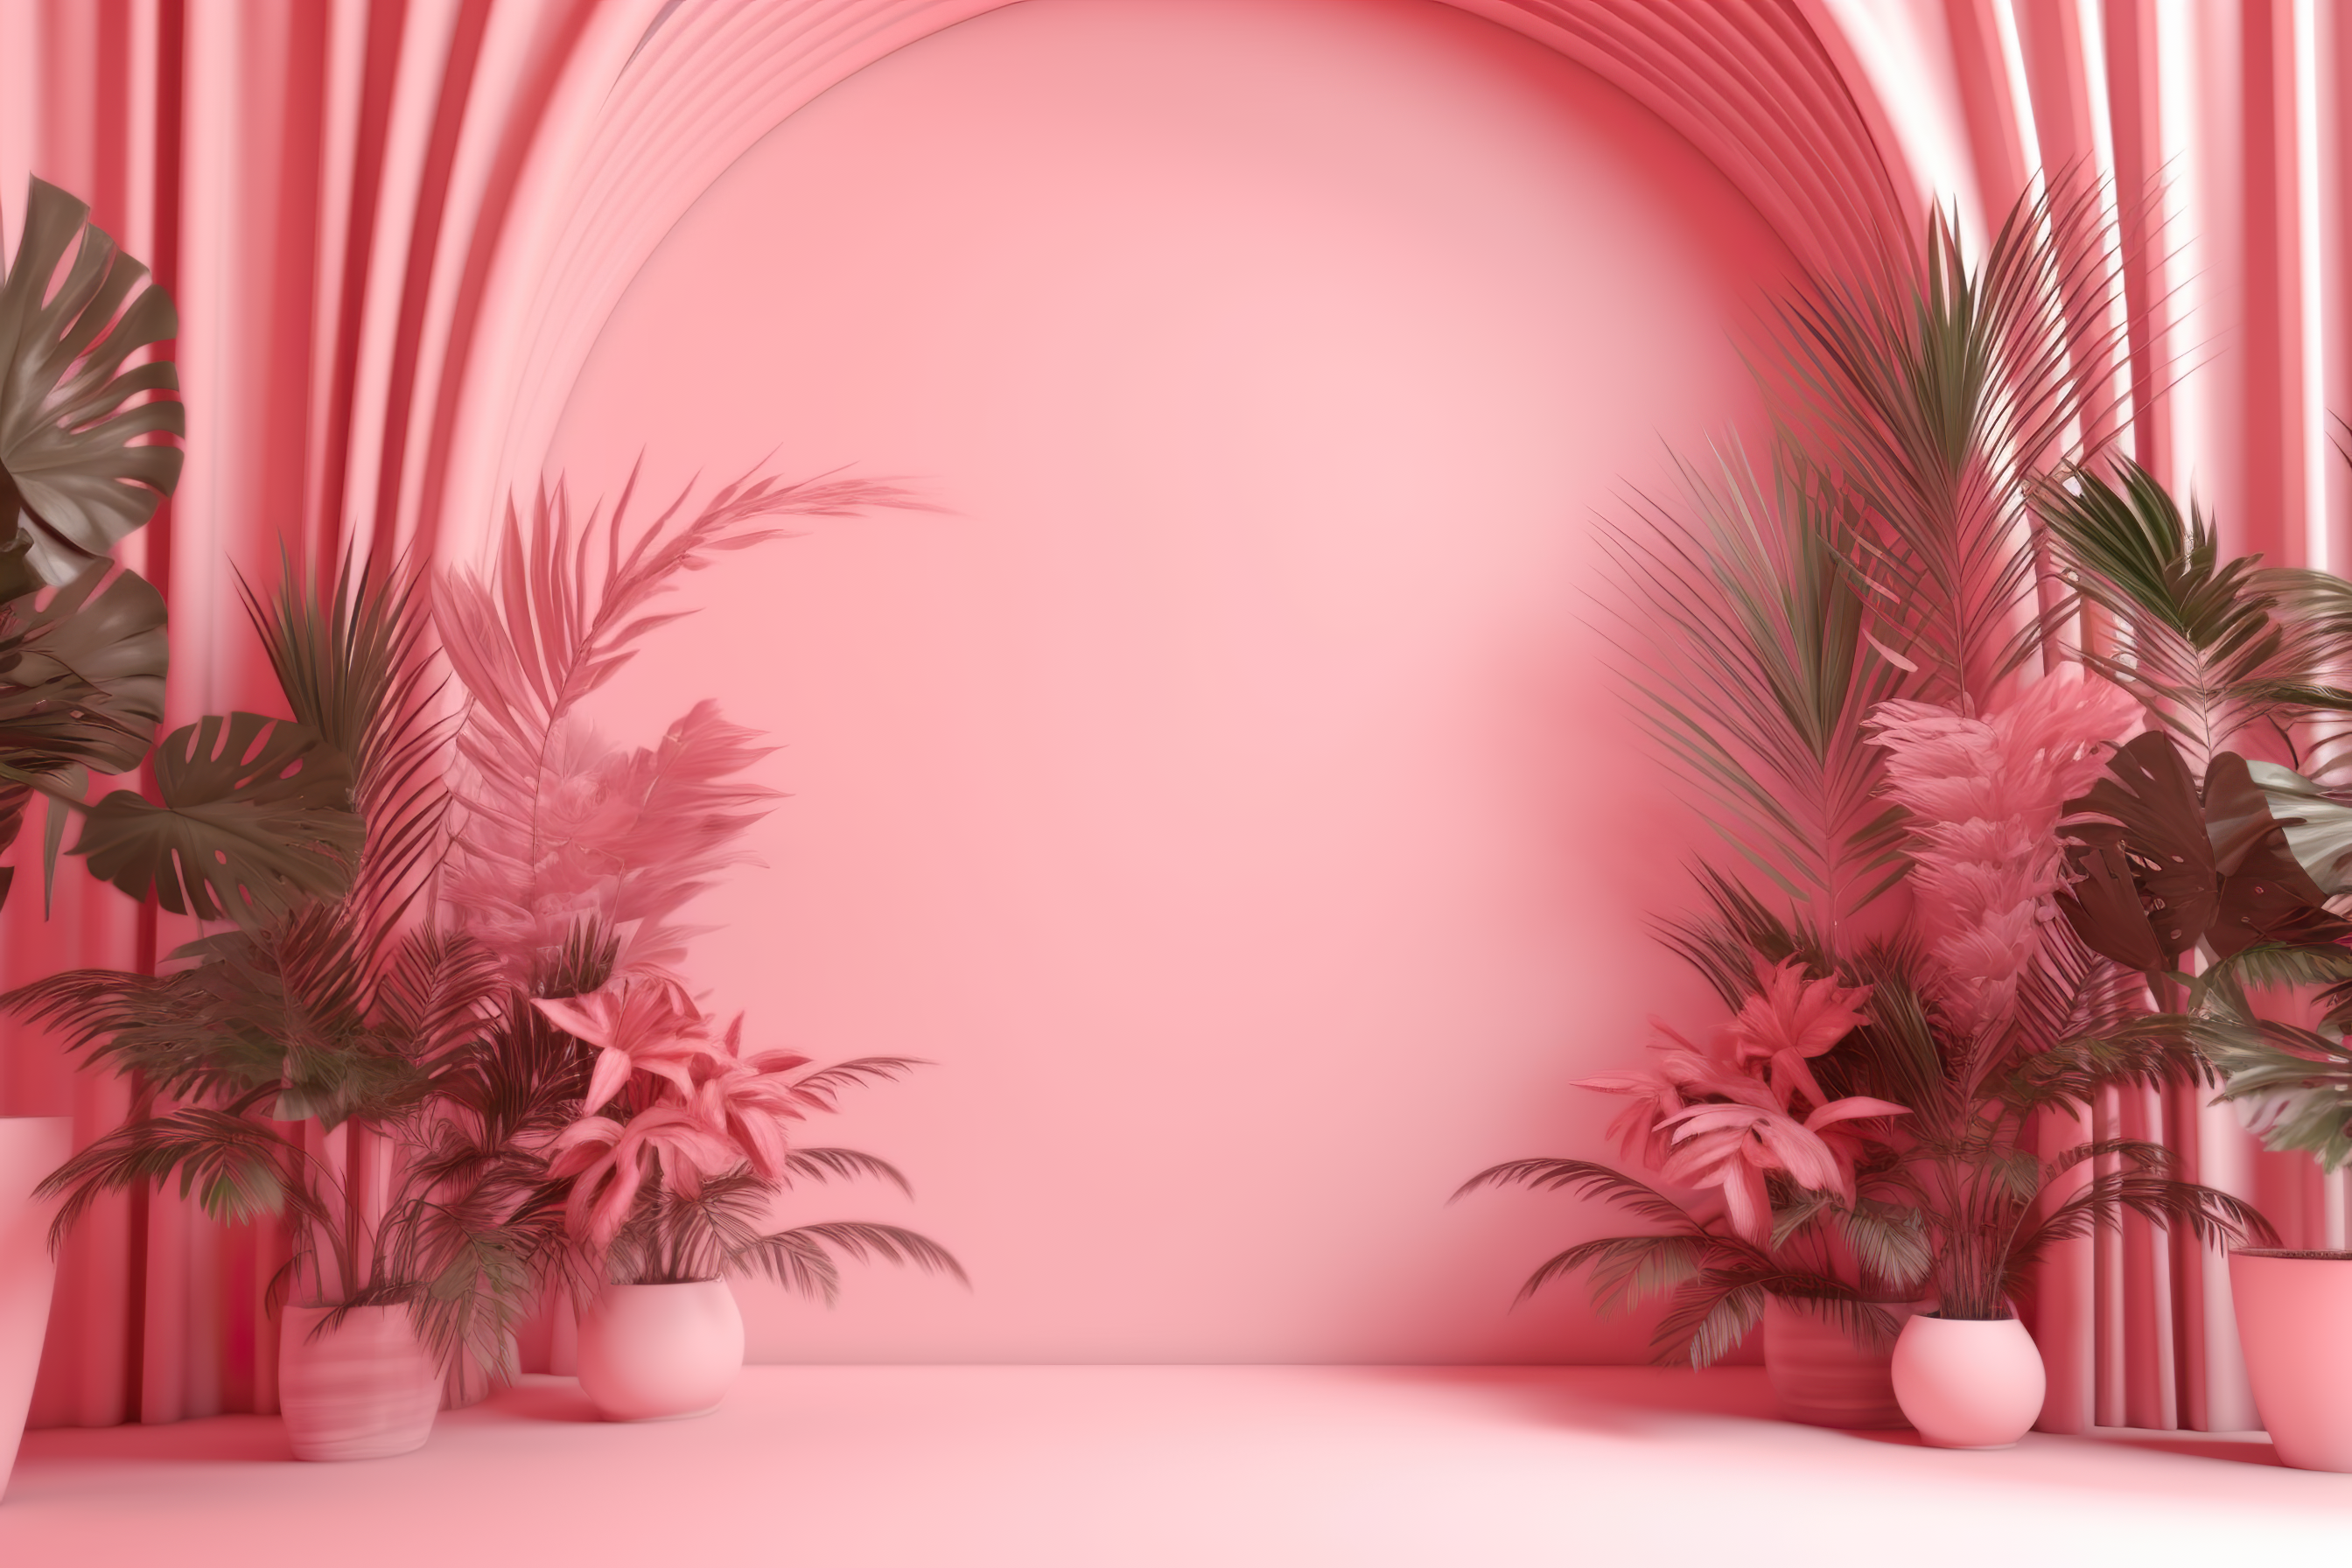 Abstract pink color gradient studio background for product presentation. Empty room with shadows of window and flowers and palm leaves